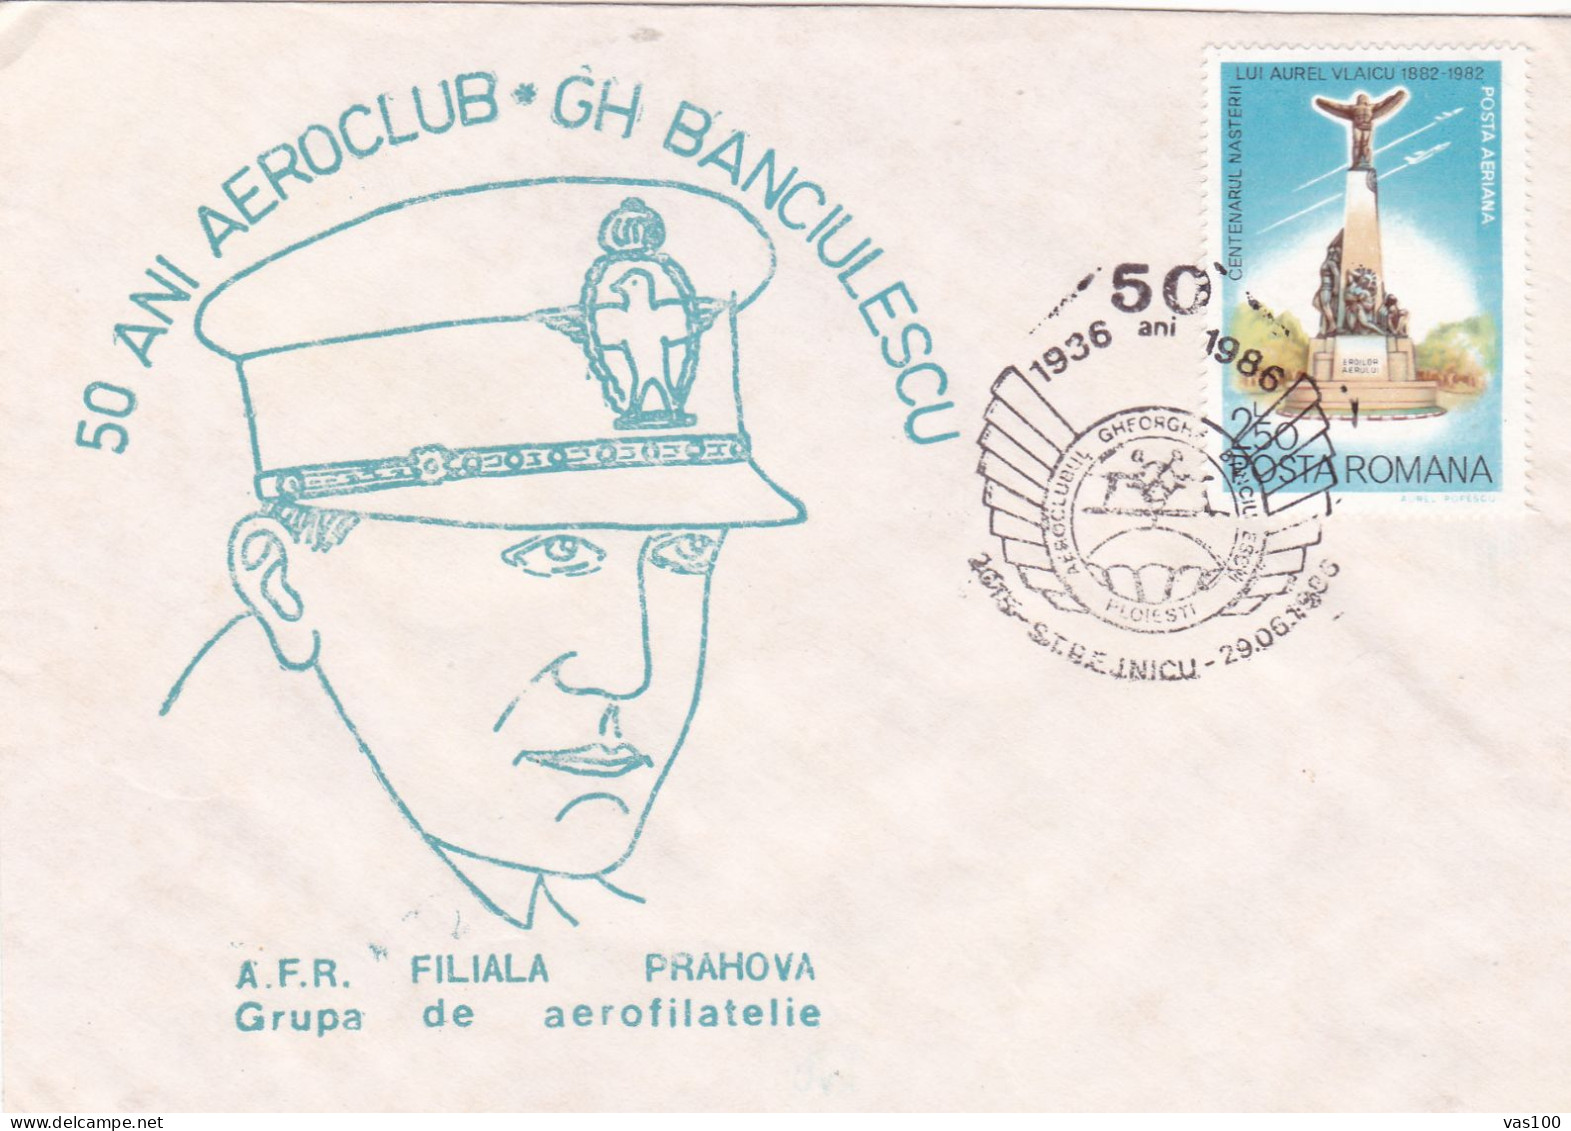 AVIATION CAPTAIN GH BANCIULESCU COVERS   STATIONERY 1986 ROMANIA - Covers & Documents